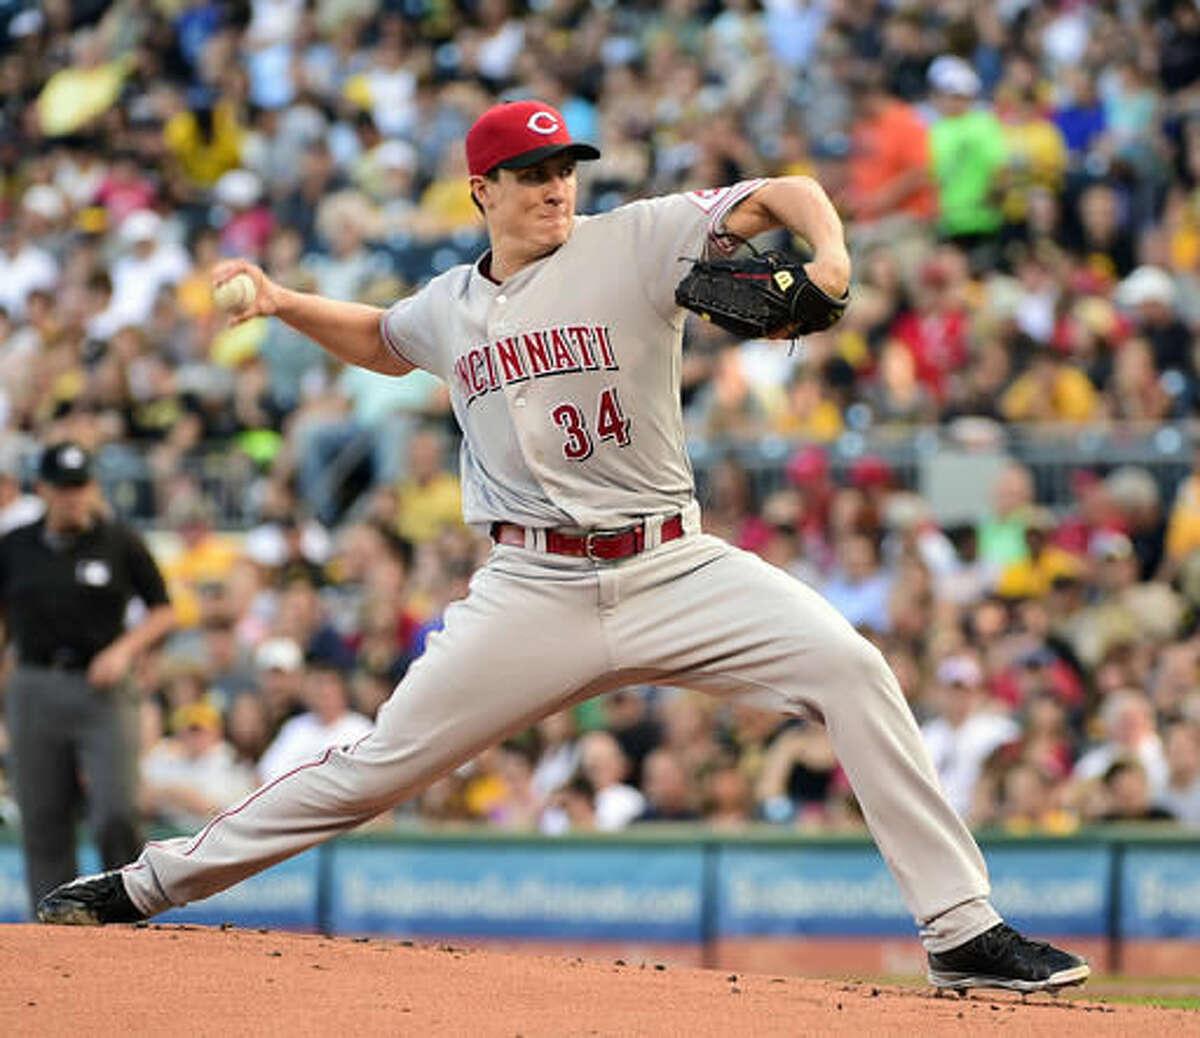 Cincinnati Reds starting pitcher Homer Bailey (34) throws in the first inning of a baseball game against the Pittsburgh Pirates in Pittsburgh, Saturday, Aug. 6, 2016. (AP Photo/Fred Vuich)